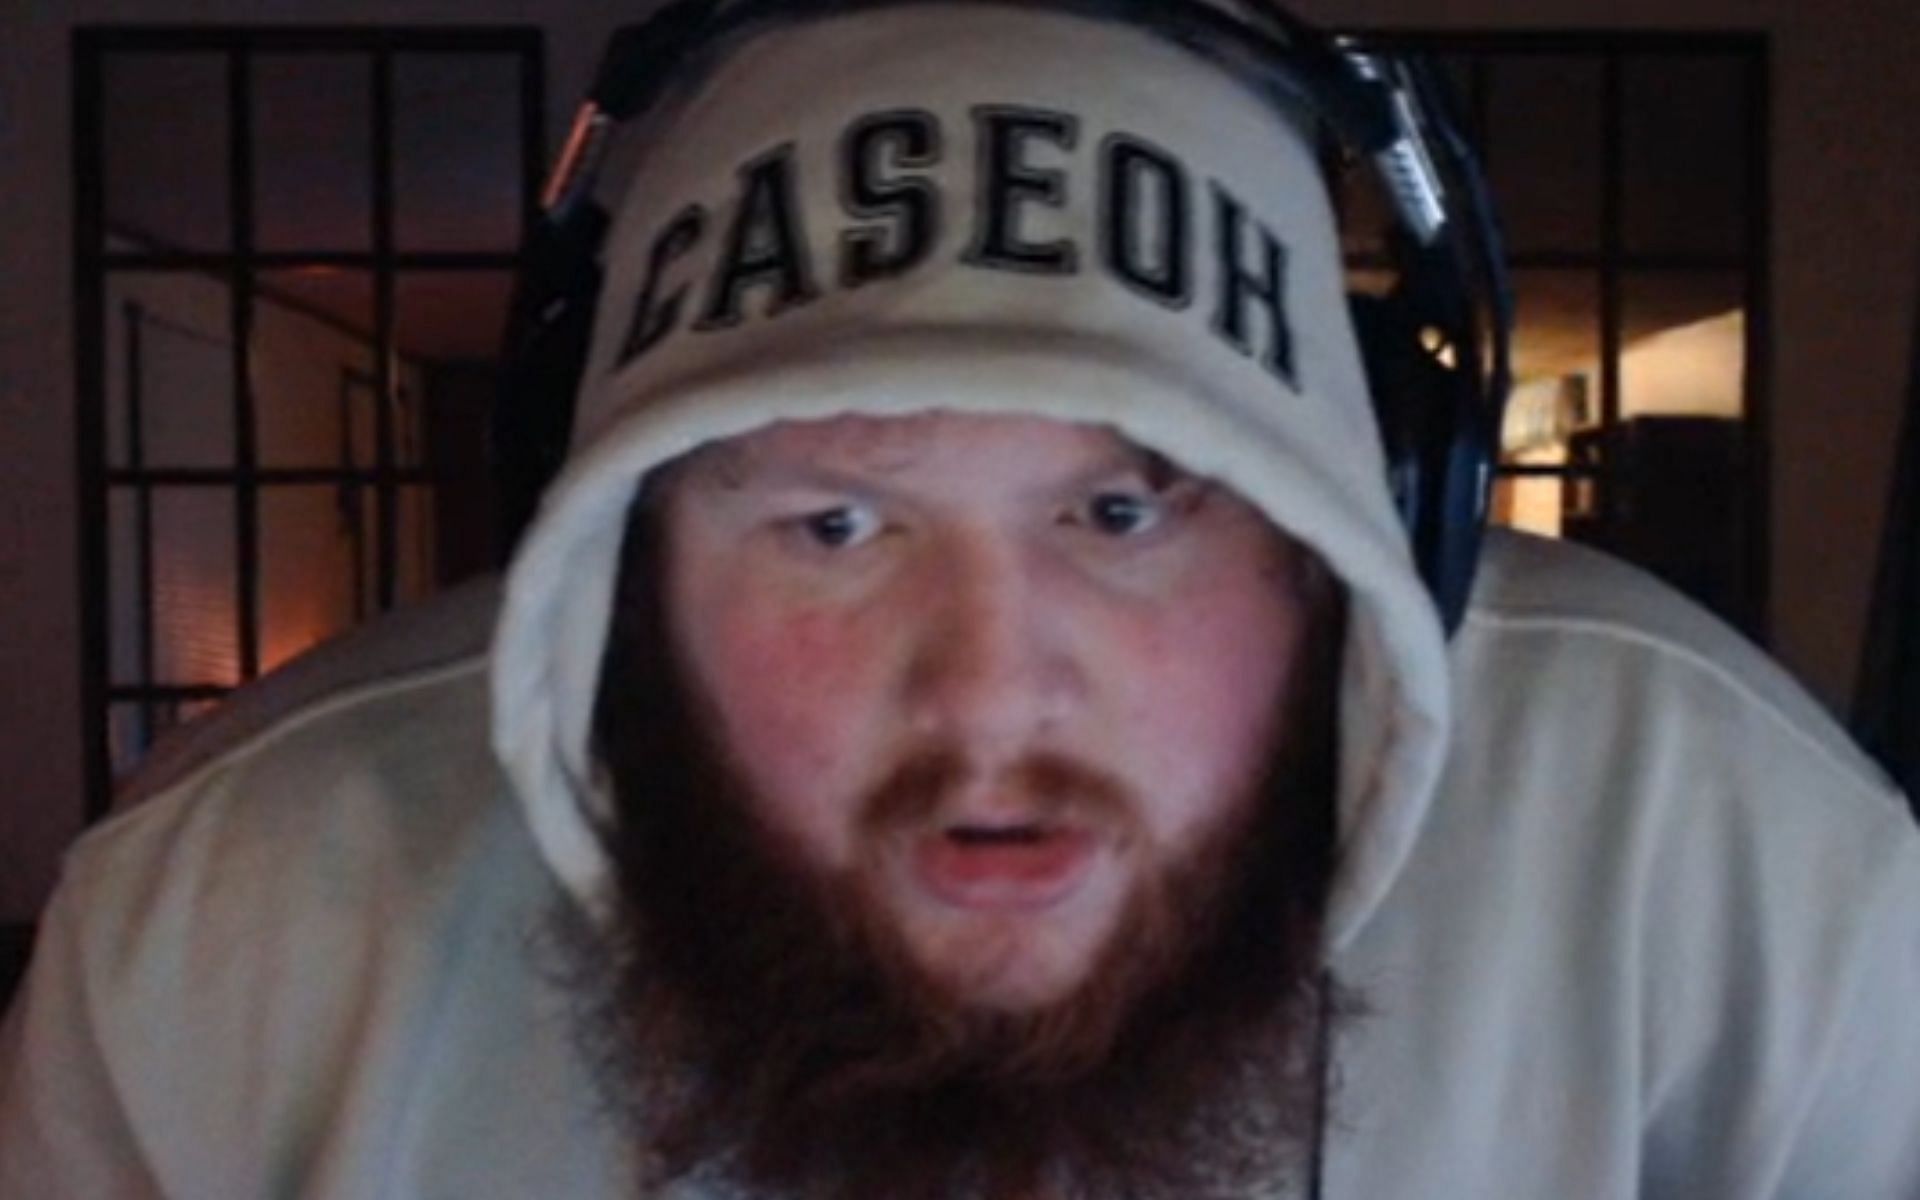 Who is CaseOh? Twitch streamer